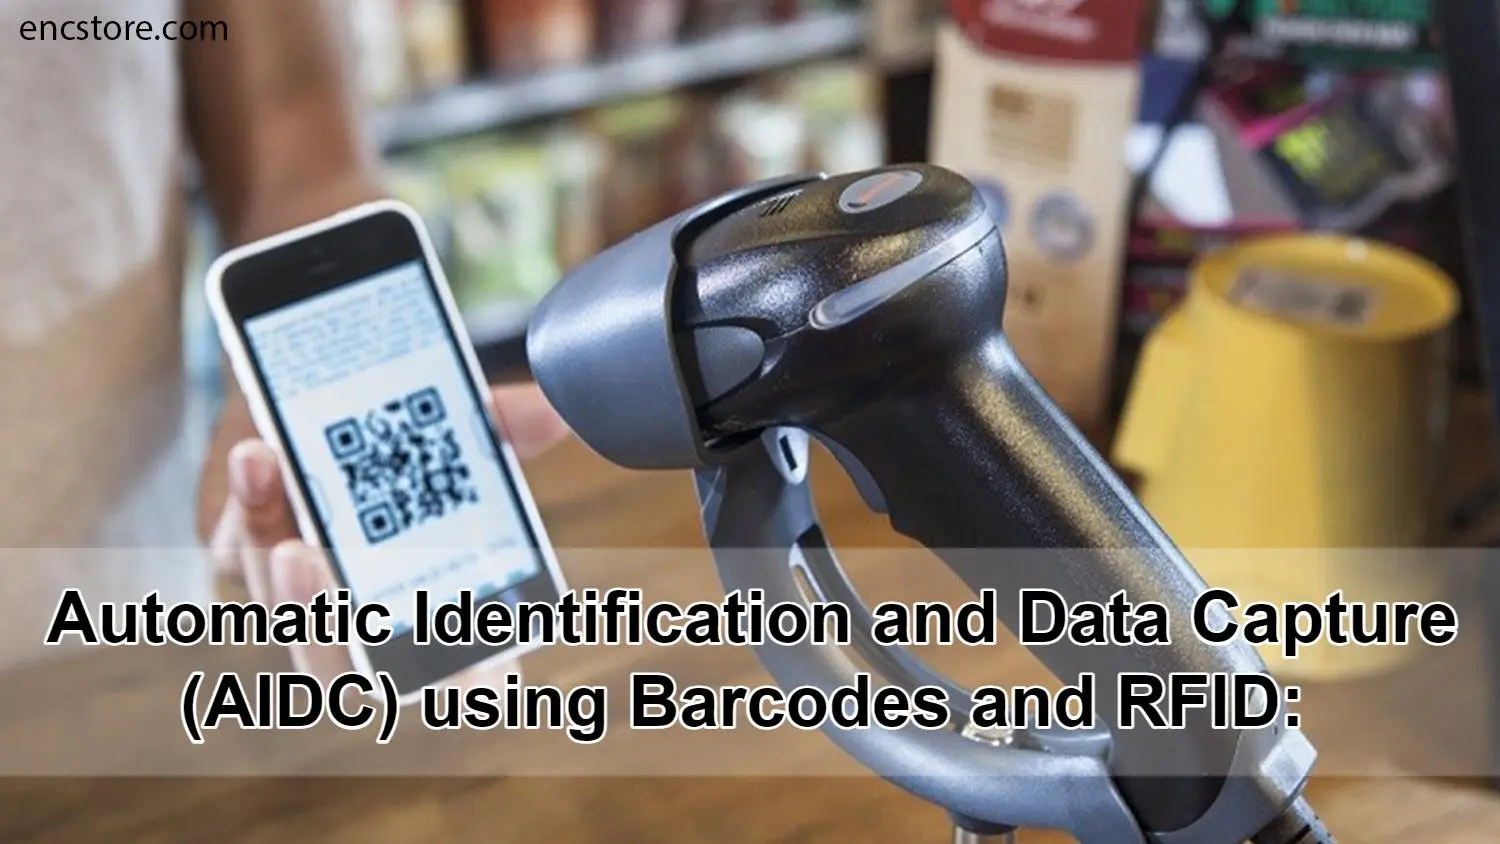 AIDC using Barcodes and RFID